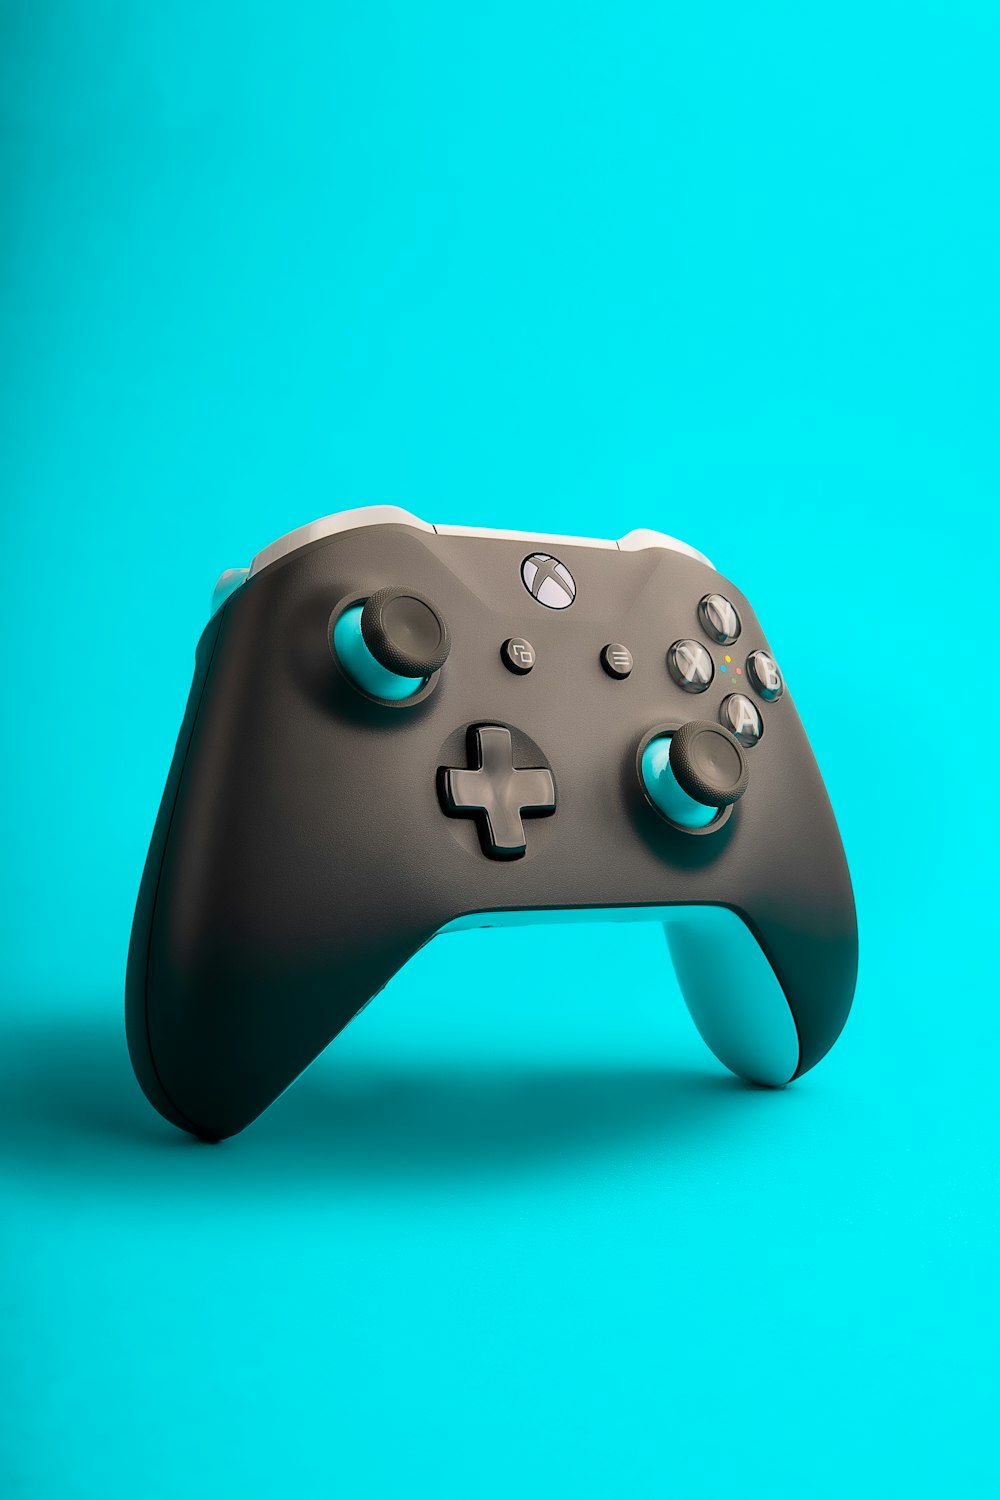 Best 100+ Gamepad Pictures | Download Free Images on Unsplash